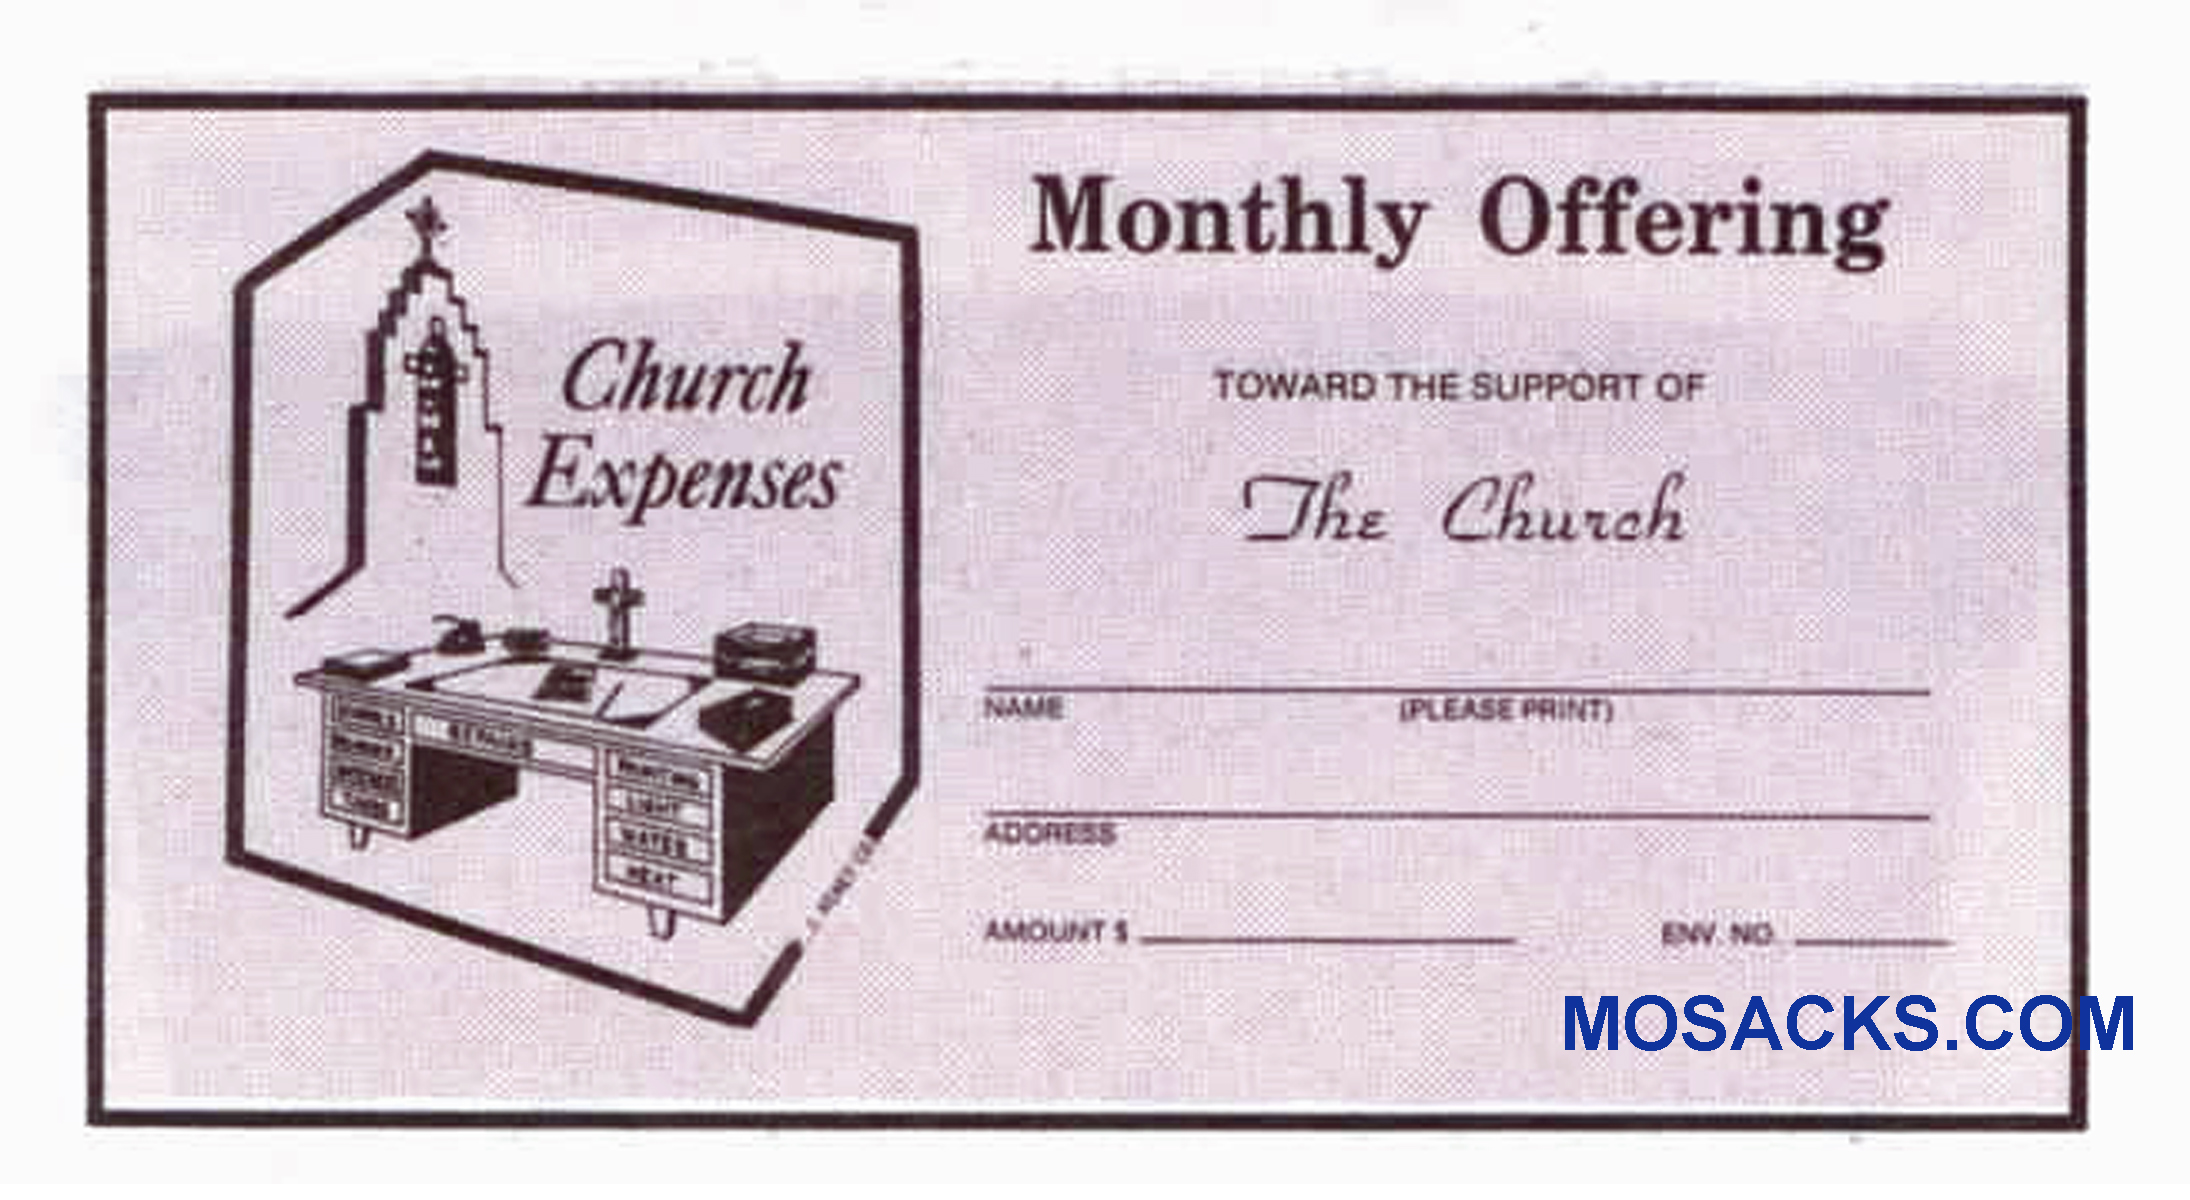 Monthly Church Offering Envelope 6-1/4 x 3-1/8 #304-367